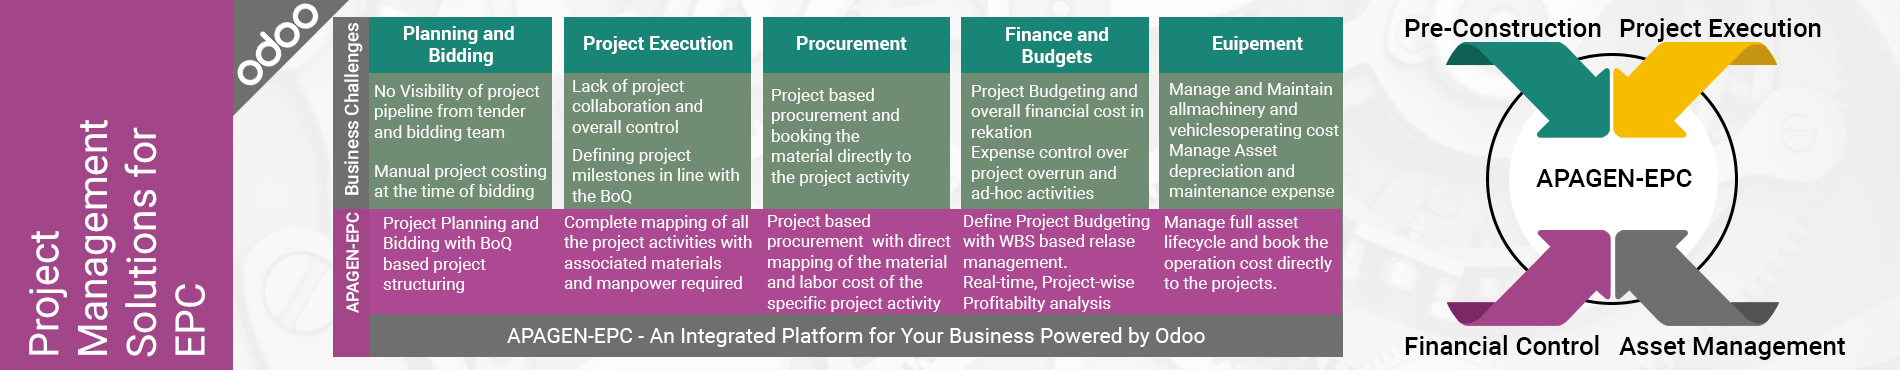 odoo project management